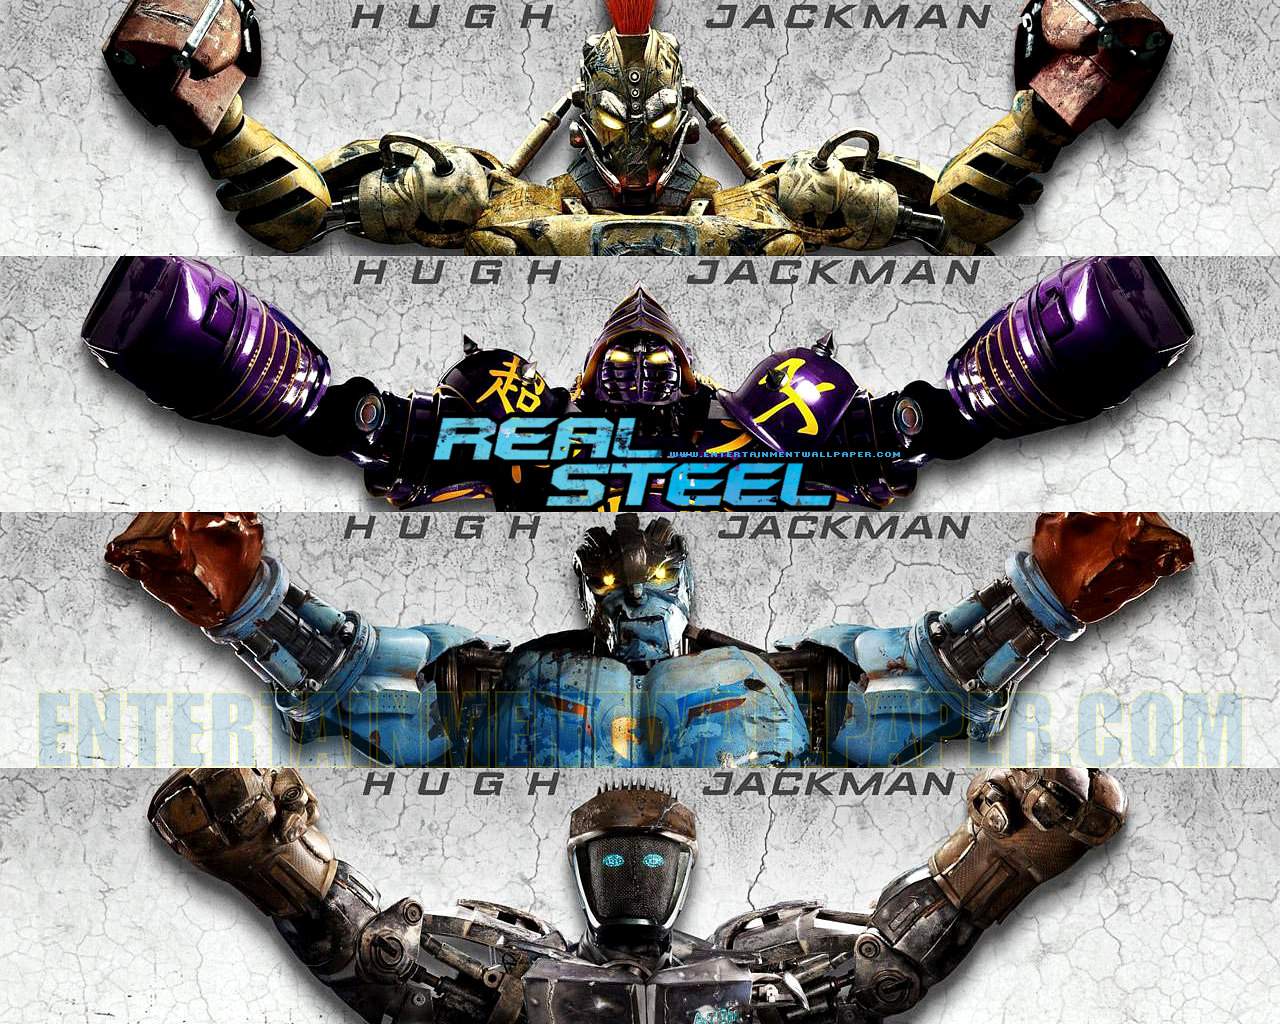 image about Real Steel movies